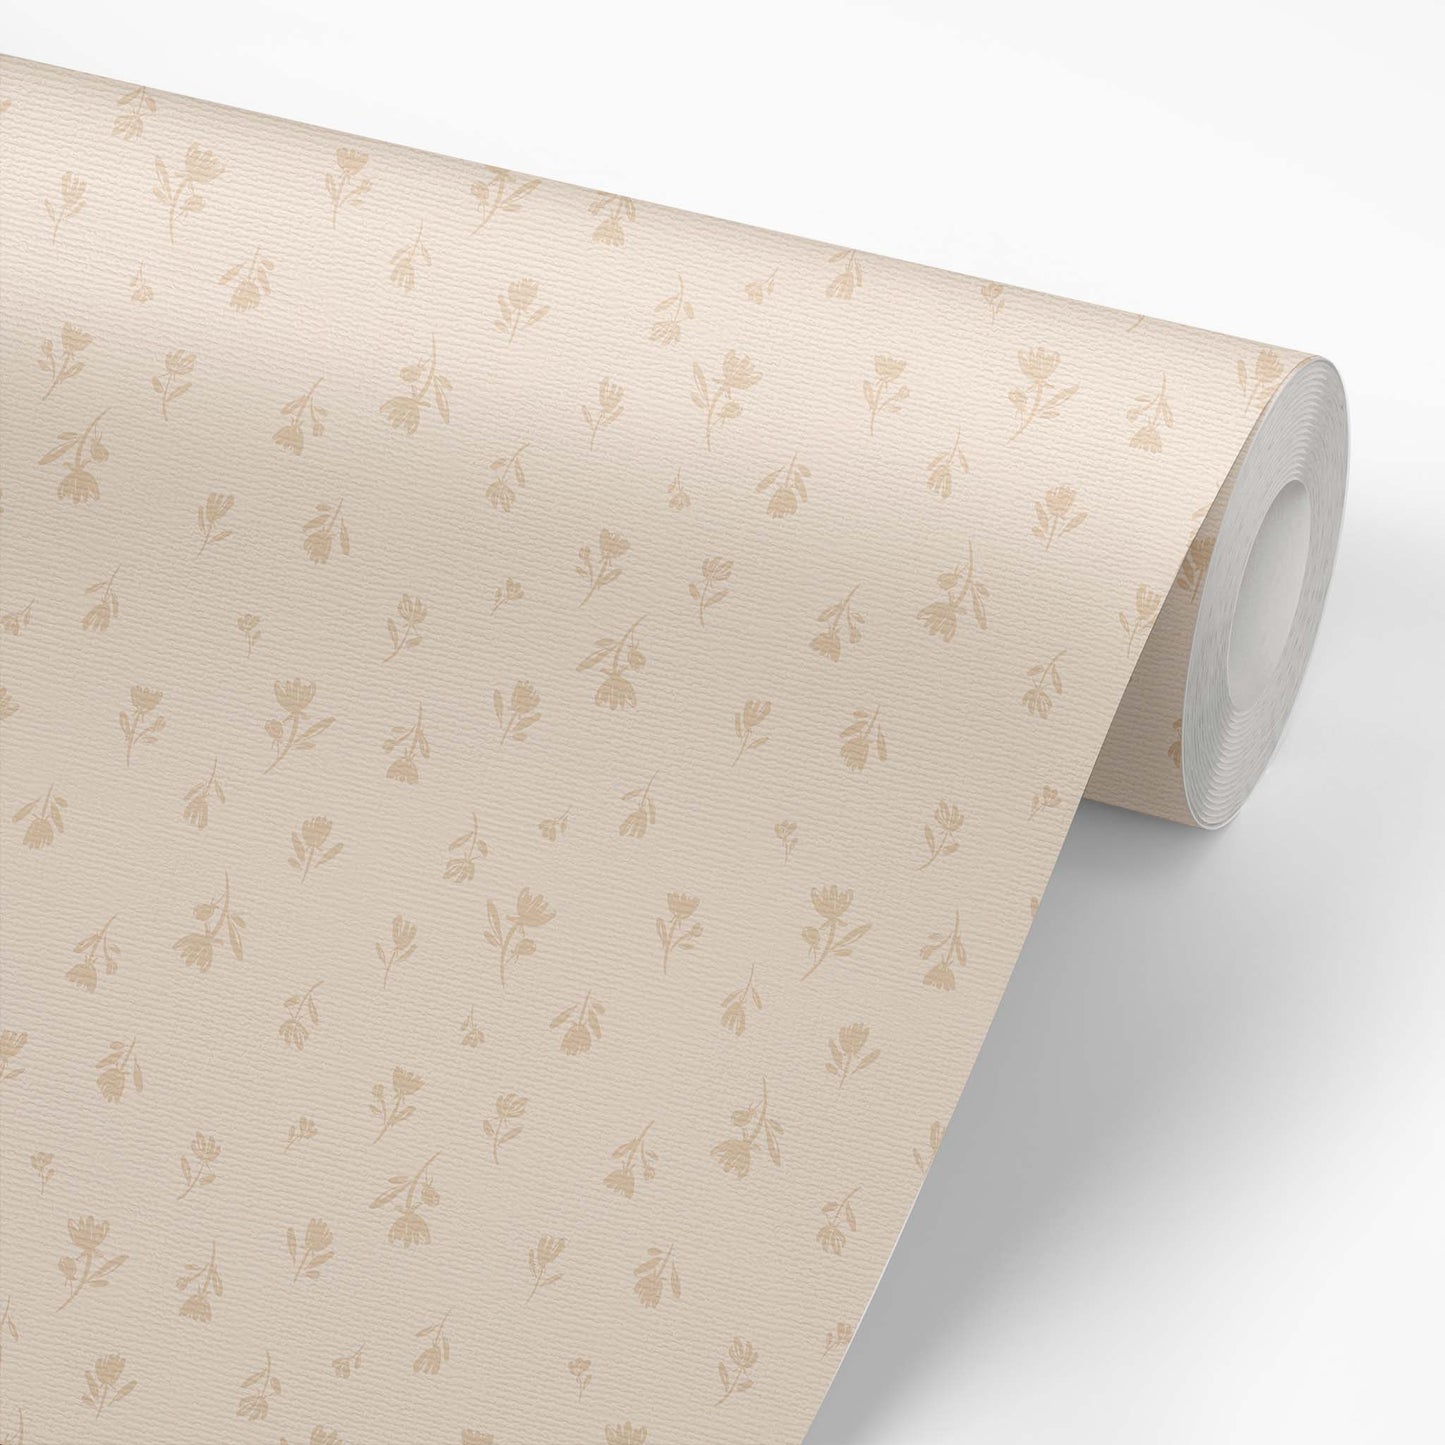 Wallpaper panel featuring Cayla Naylor Annette-Dogwood Peel and Stick Wallpaper - a floral pattern